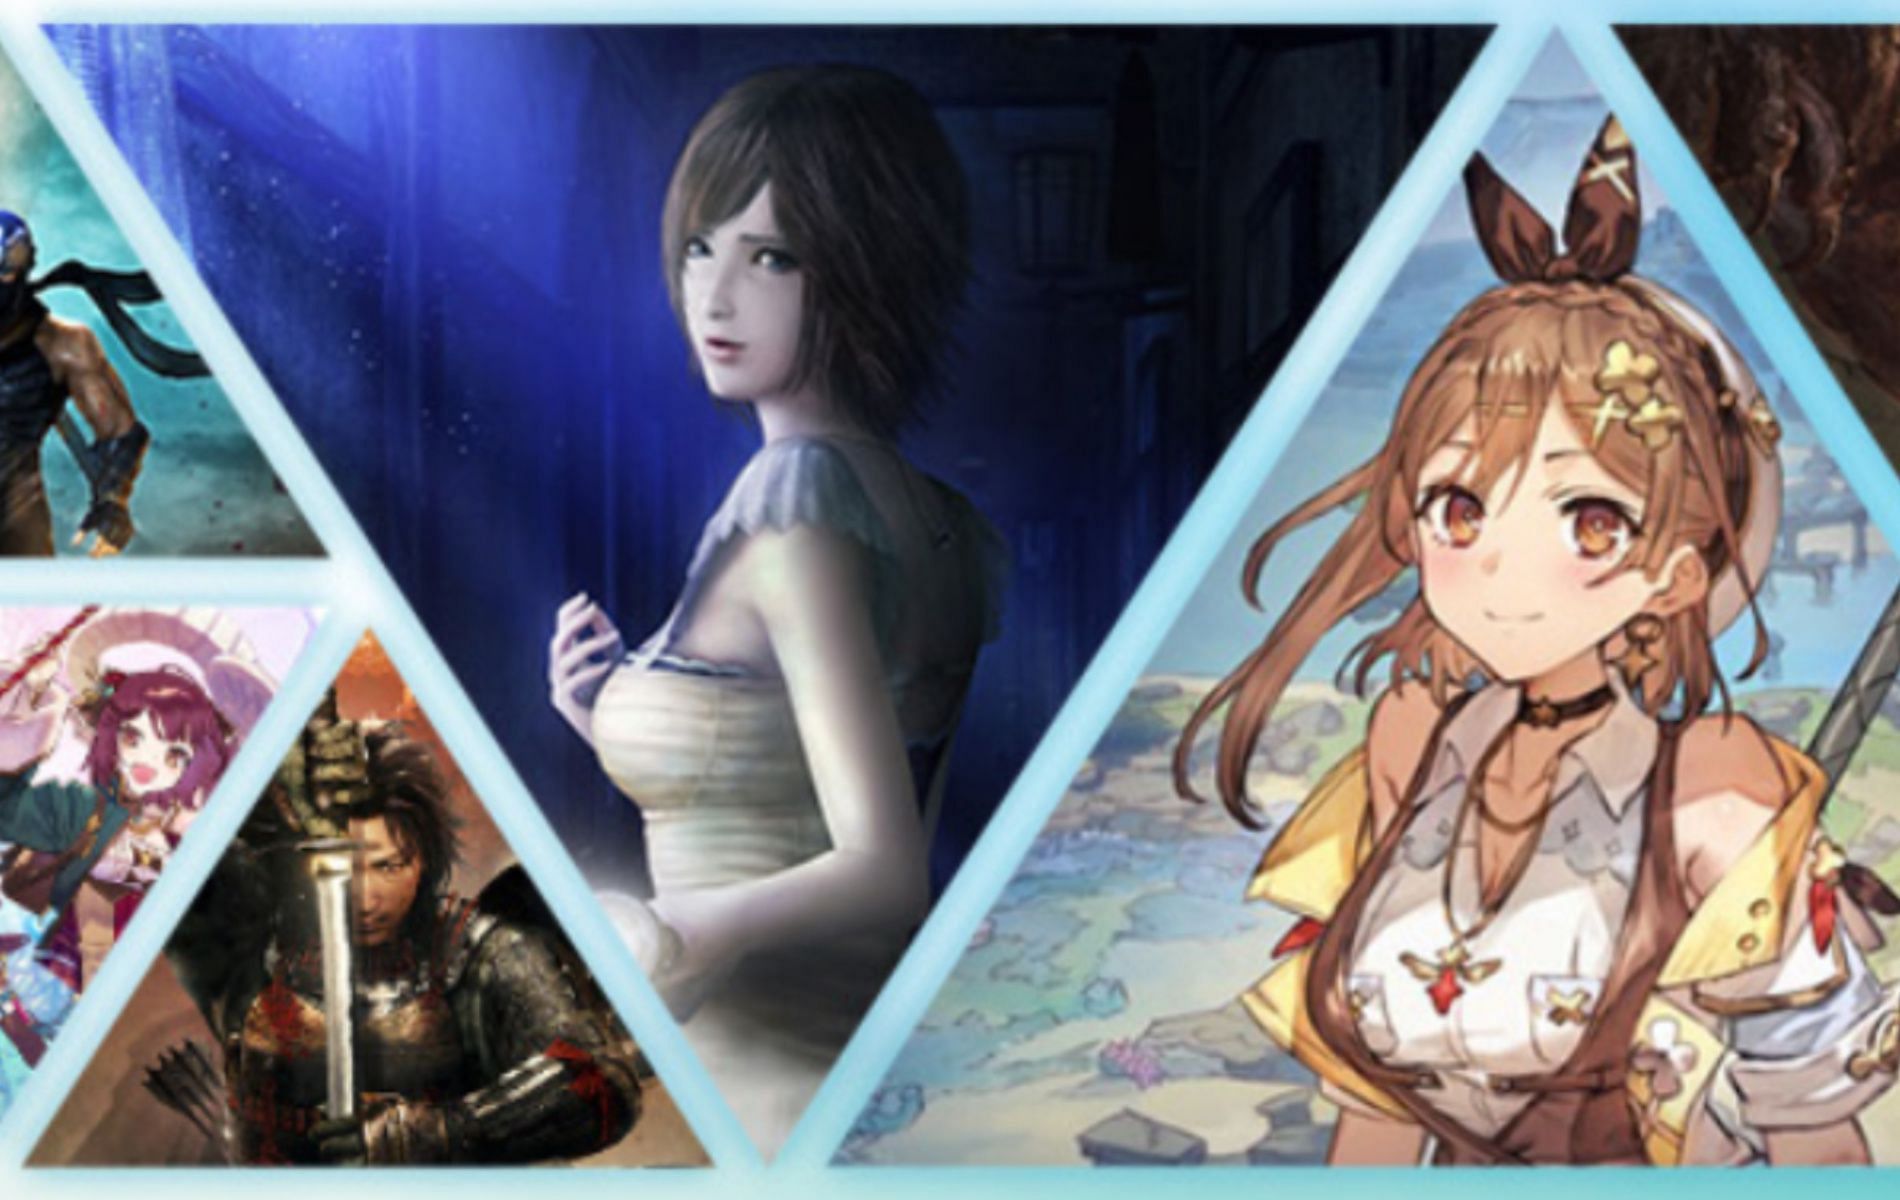 Koei Tecmo Summer Sale banner featuring Fatal Frame 4, Atelier Ryza 3 and more